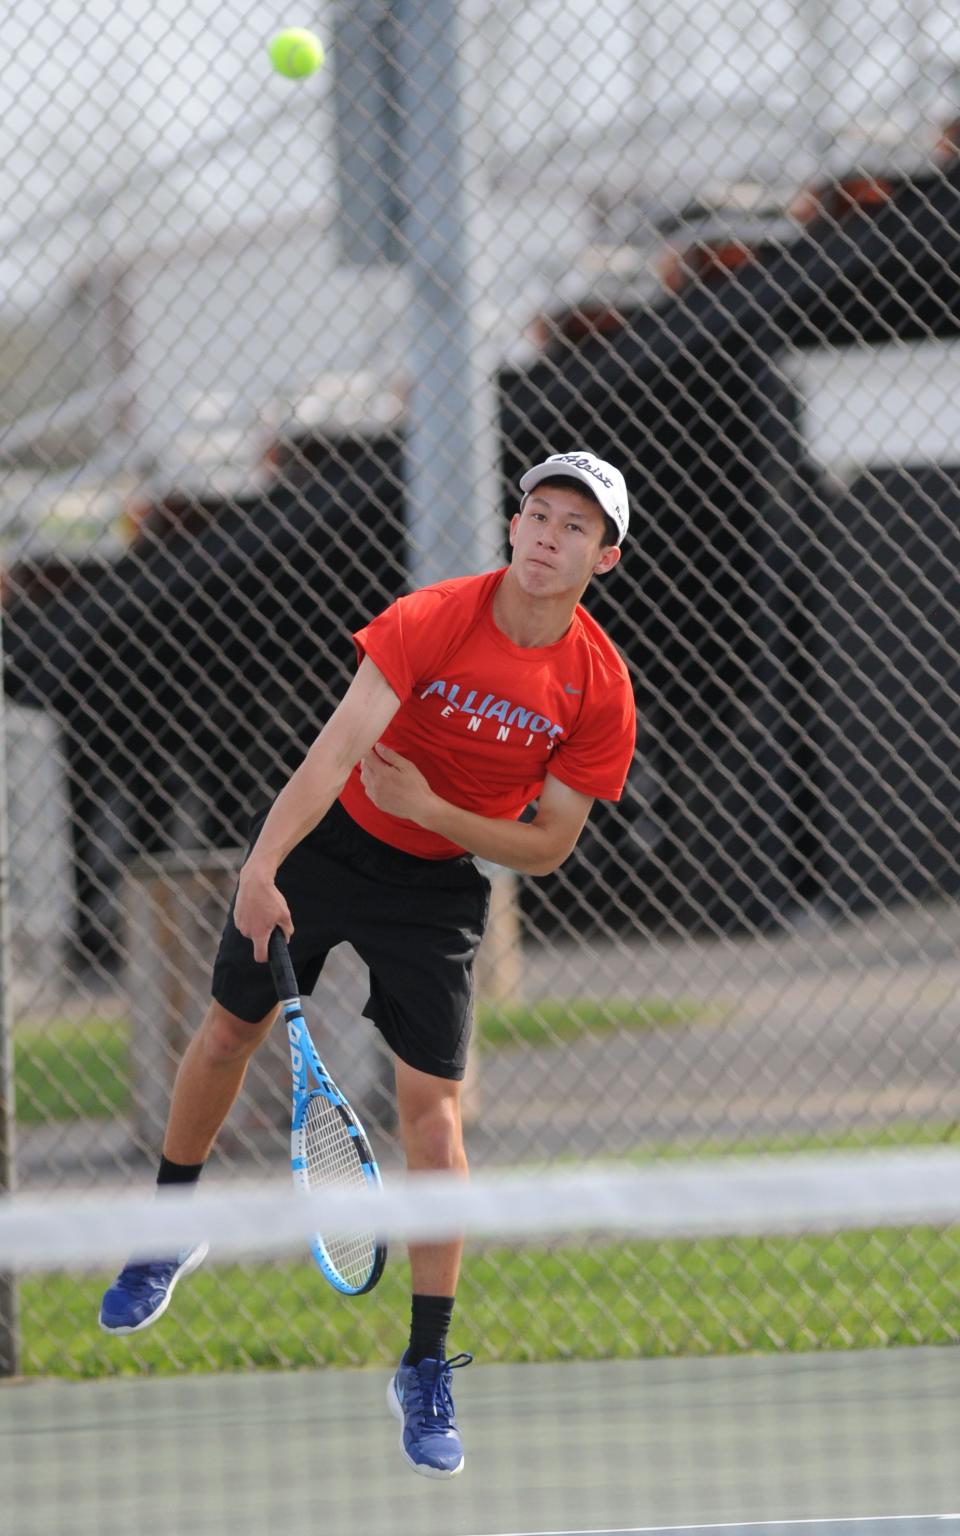 Blake Hood of Alliance was the Eastern Buckeye Conference Player of the Year for boys tennis.